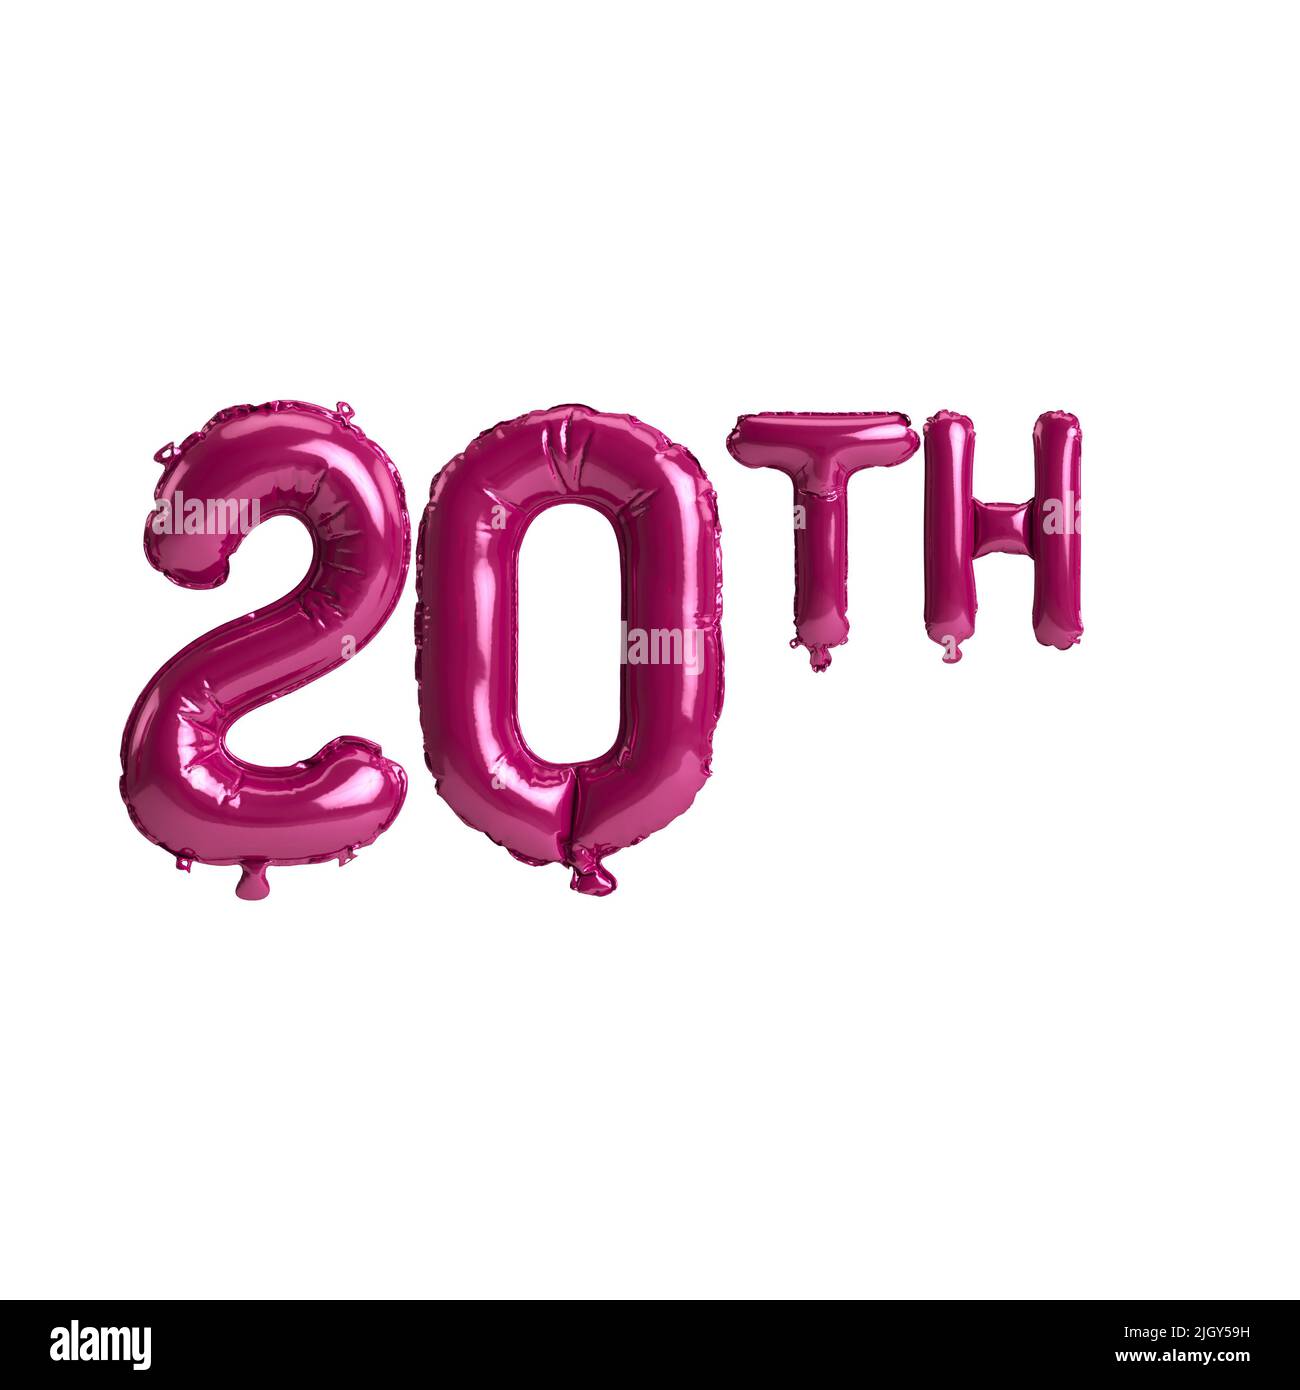 3d illustration of 20th dark pink balloons isolated on background Stock Photo